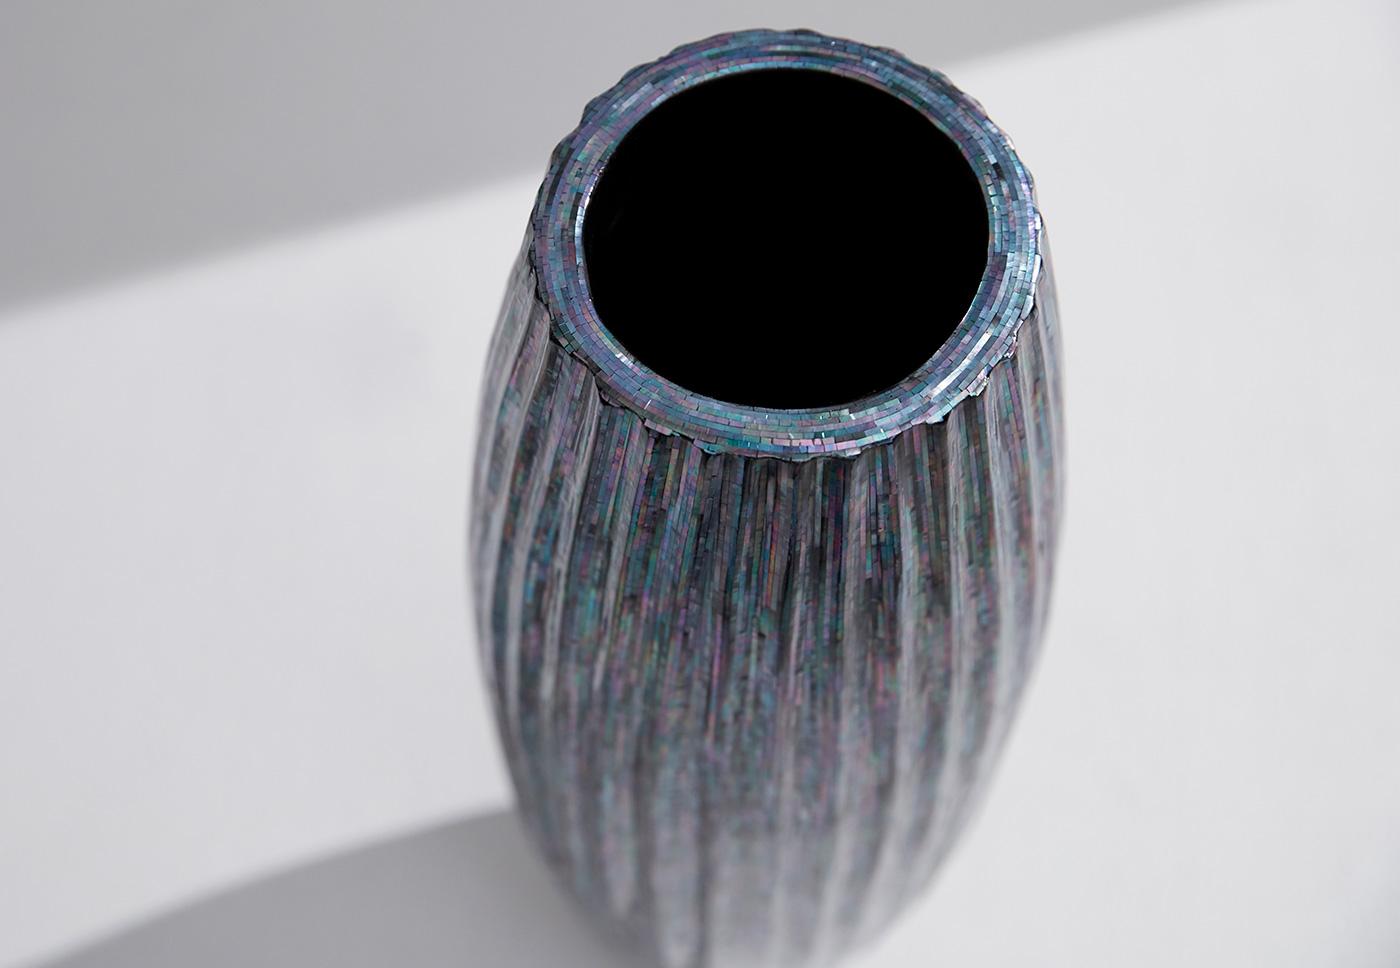 Lacquered Contemporary Sculptural Object with Black Mother-of-Pearl_Object Vase 12 For Sale